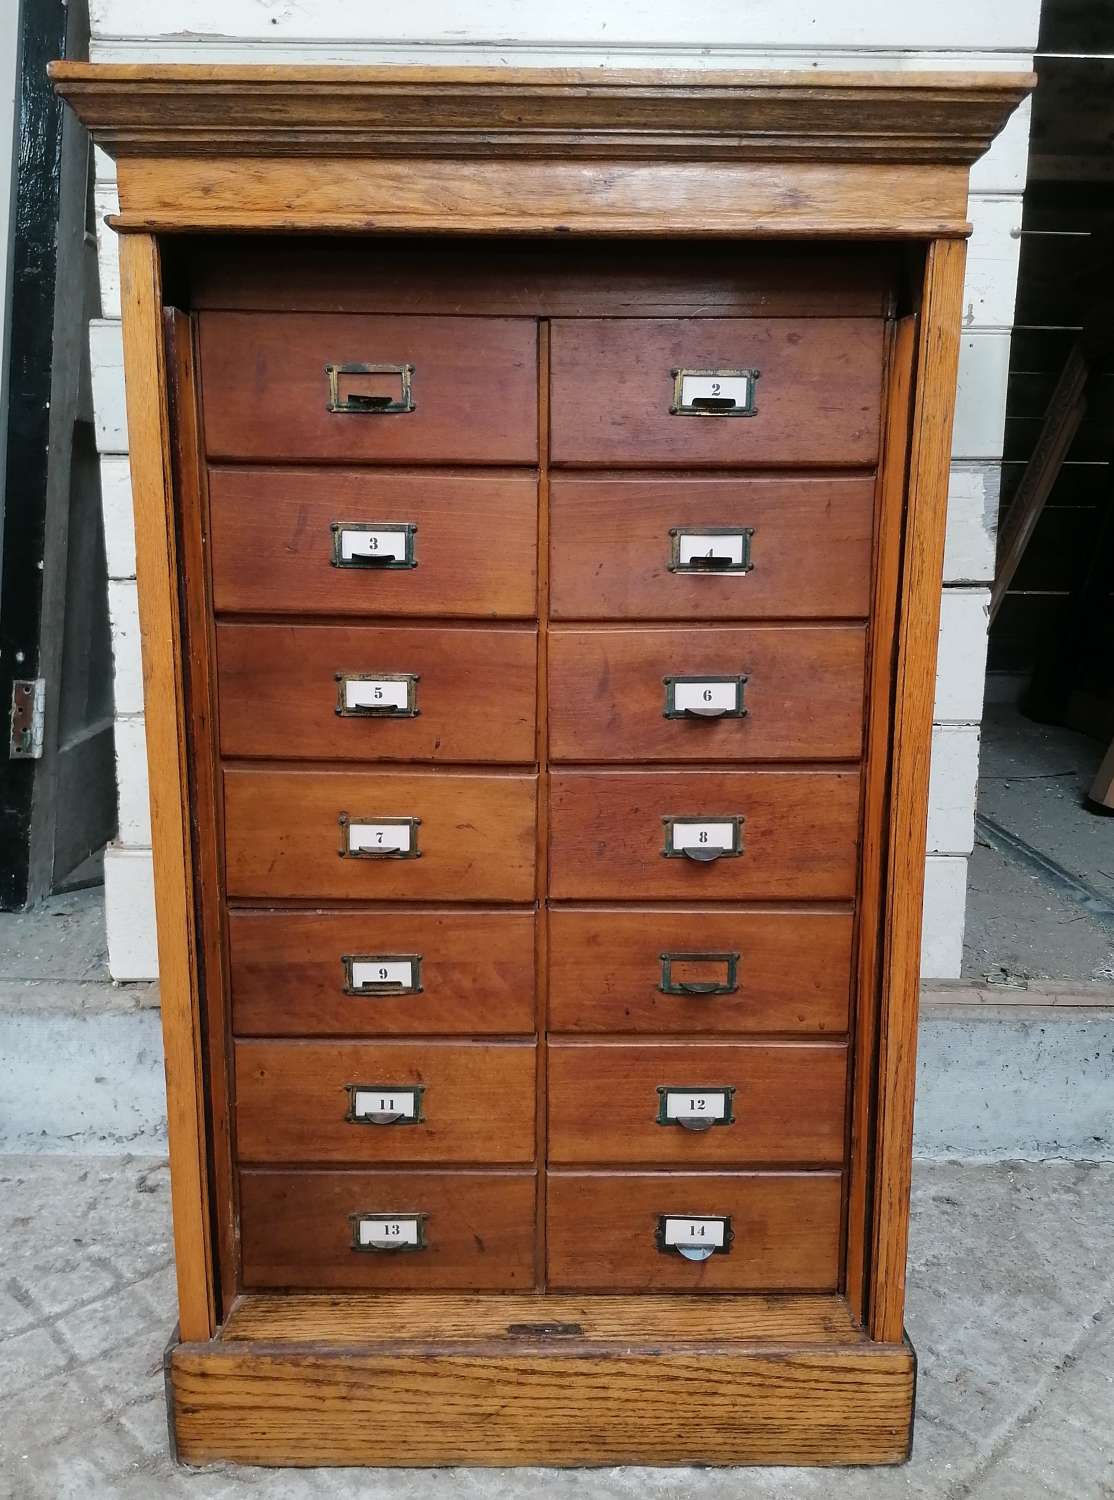 M1669 A VERY NICE RECLAIMED 1930's OAK 14 DRAWER STORAGE UNIT CABINET